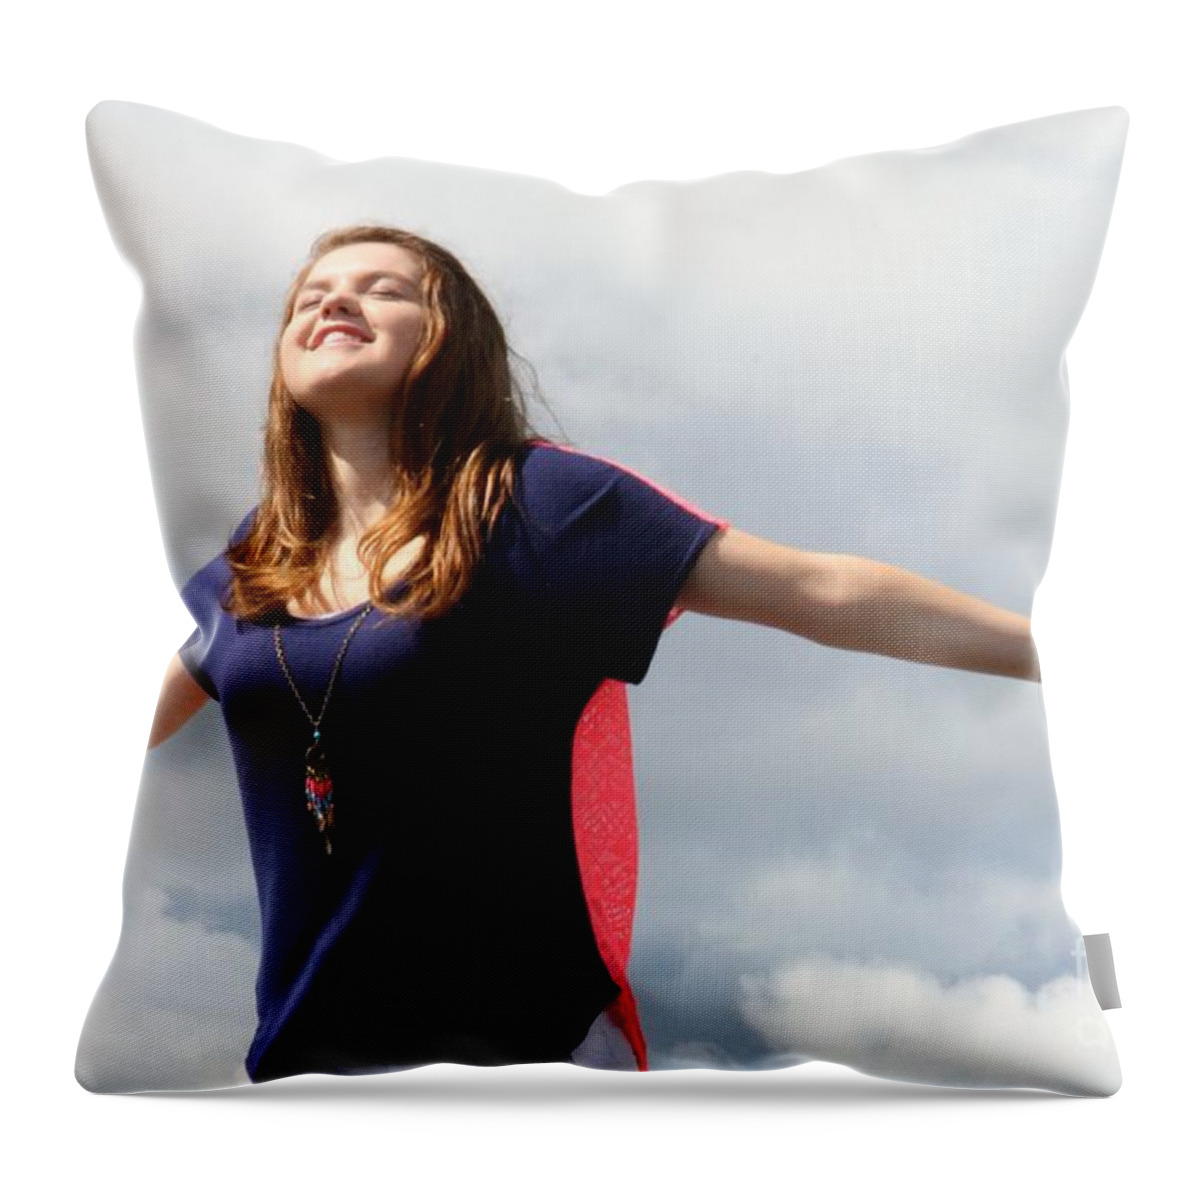  Throw Pillow featuring the photograph 3605 by Mark J Seefeldt